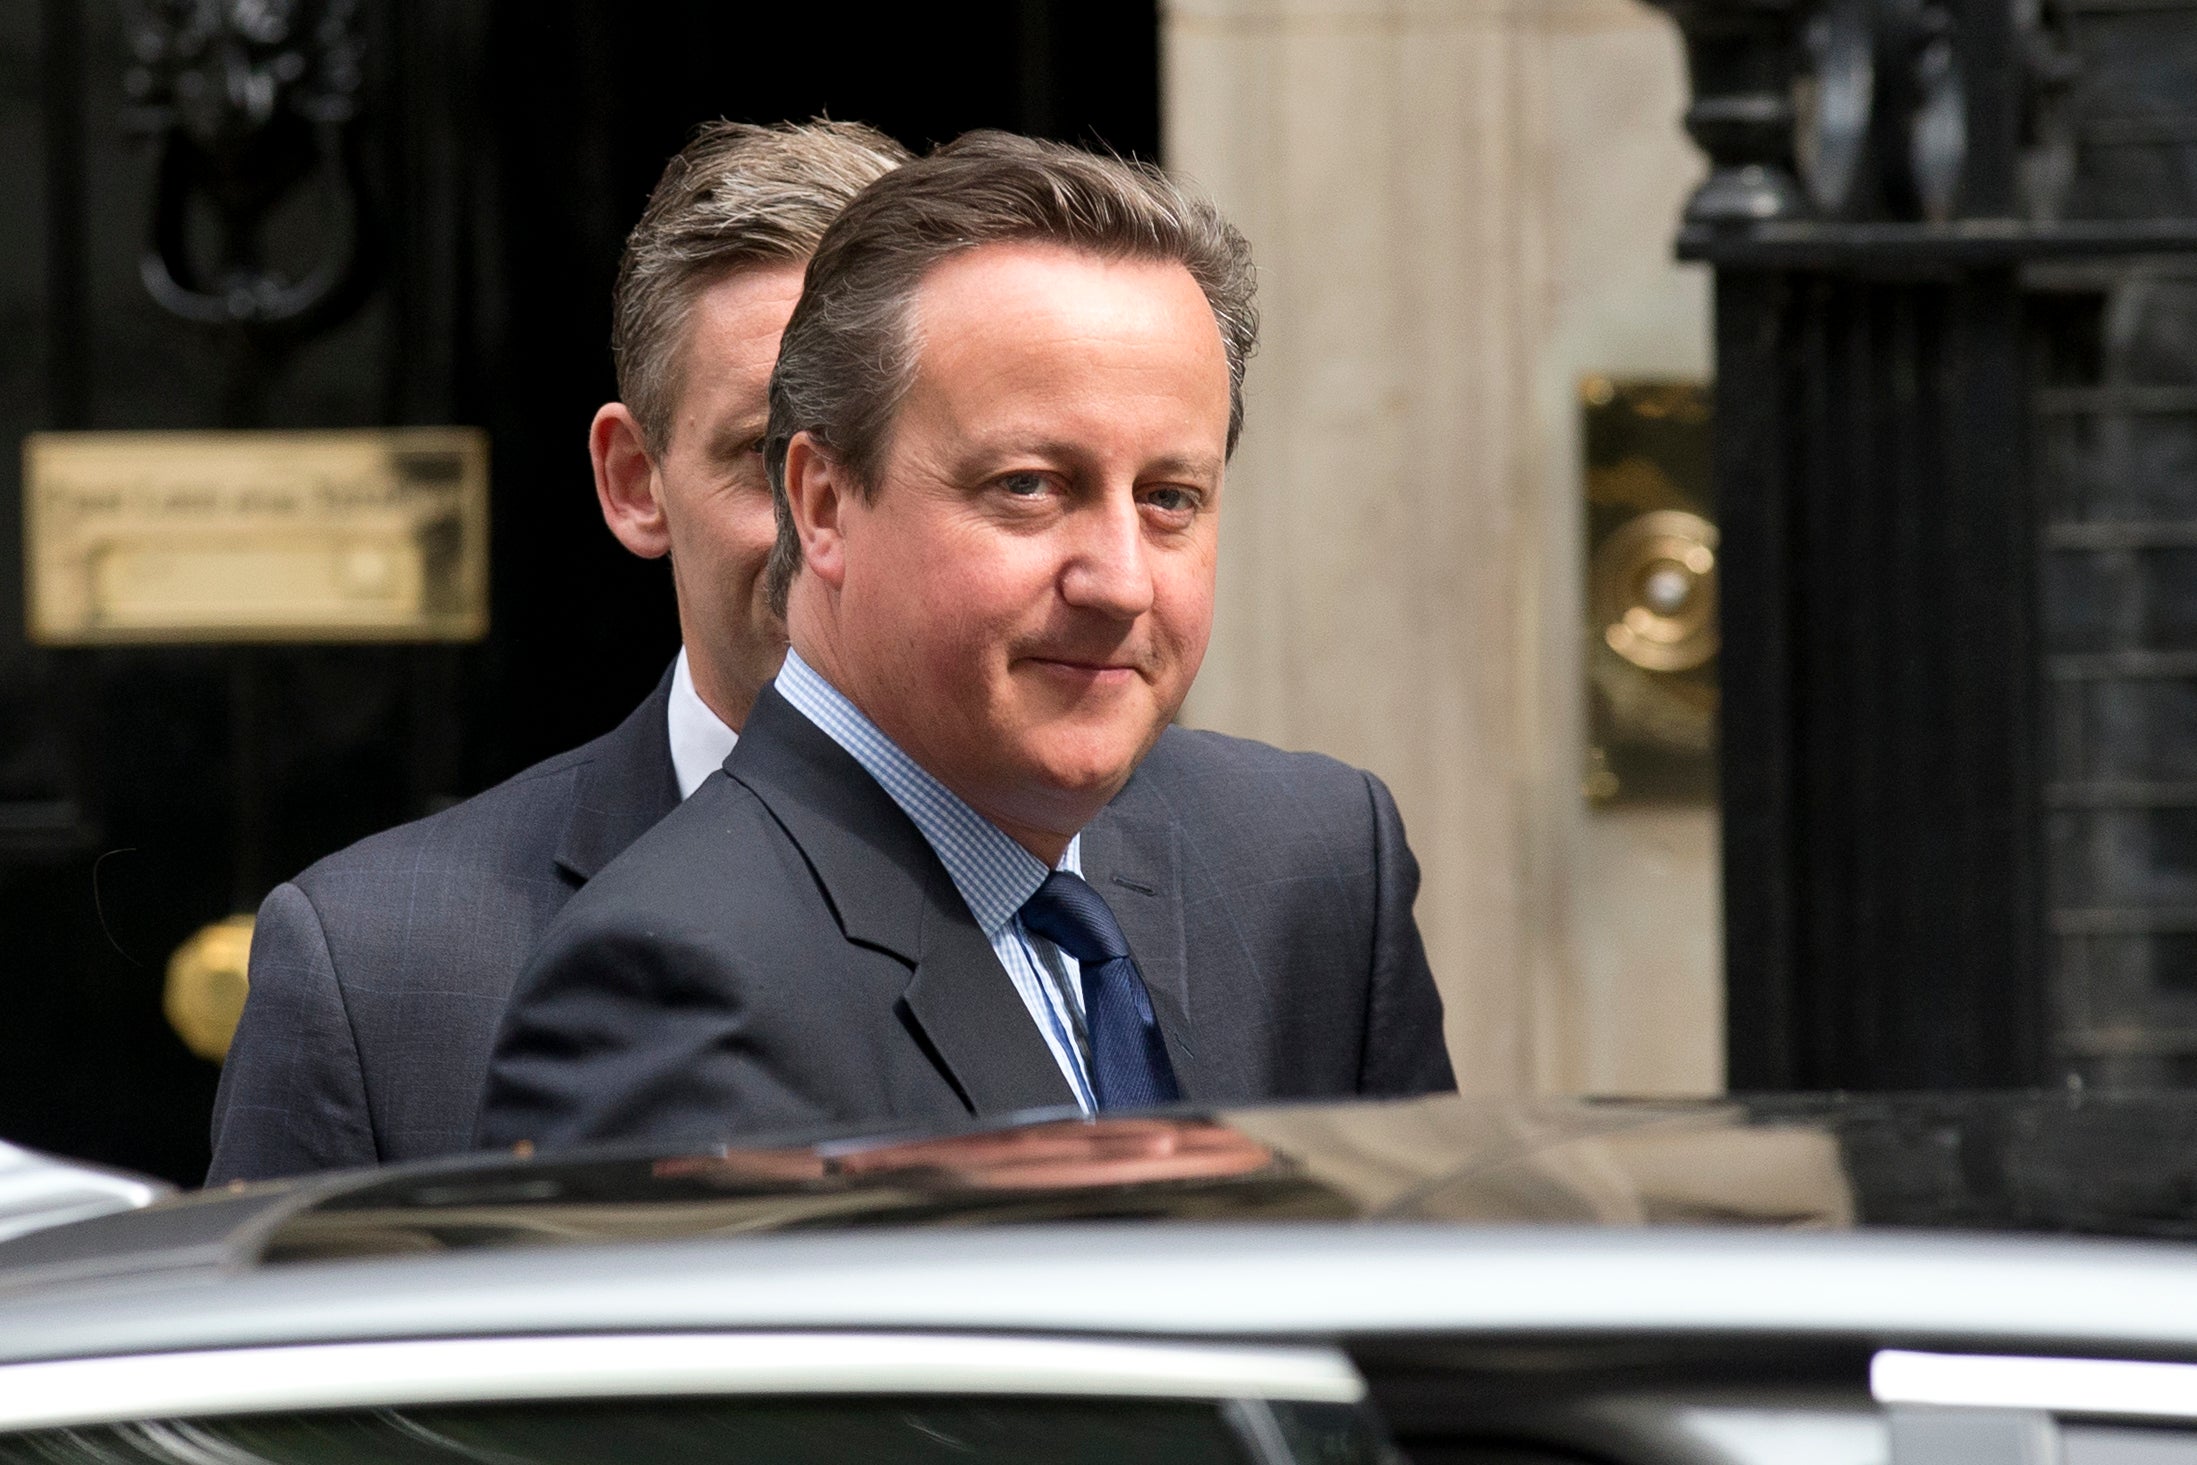 David Cameron leaves 10 Downing Street to attend Prime Minister's Questions